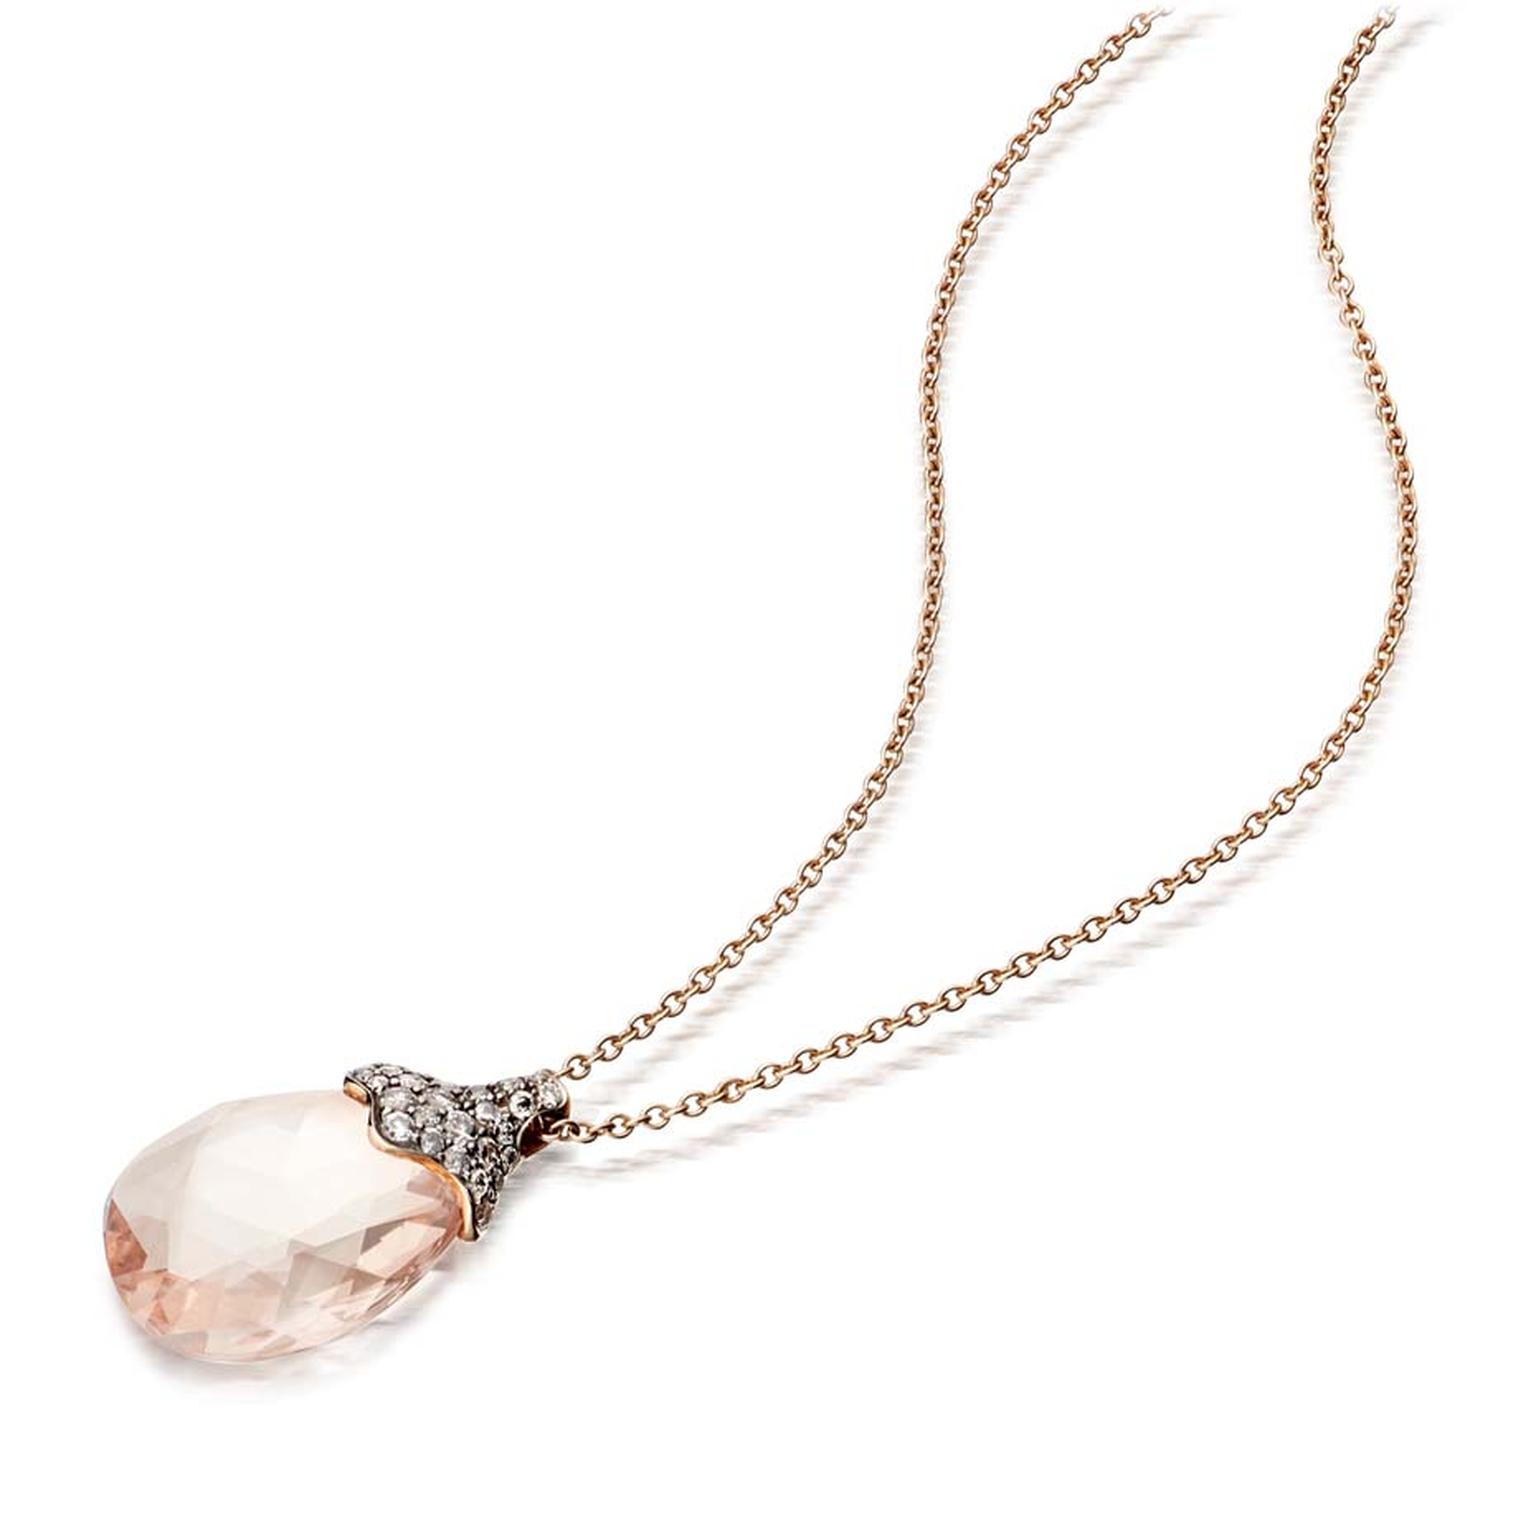 Medium Fao pendant by Astley Clarke, set with a 7.02ct morganite and pavé diamonds.